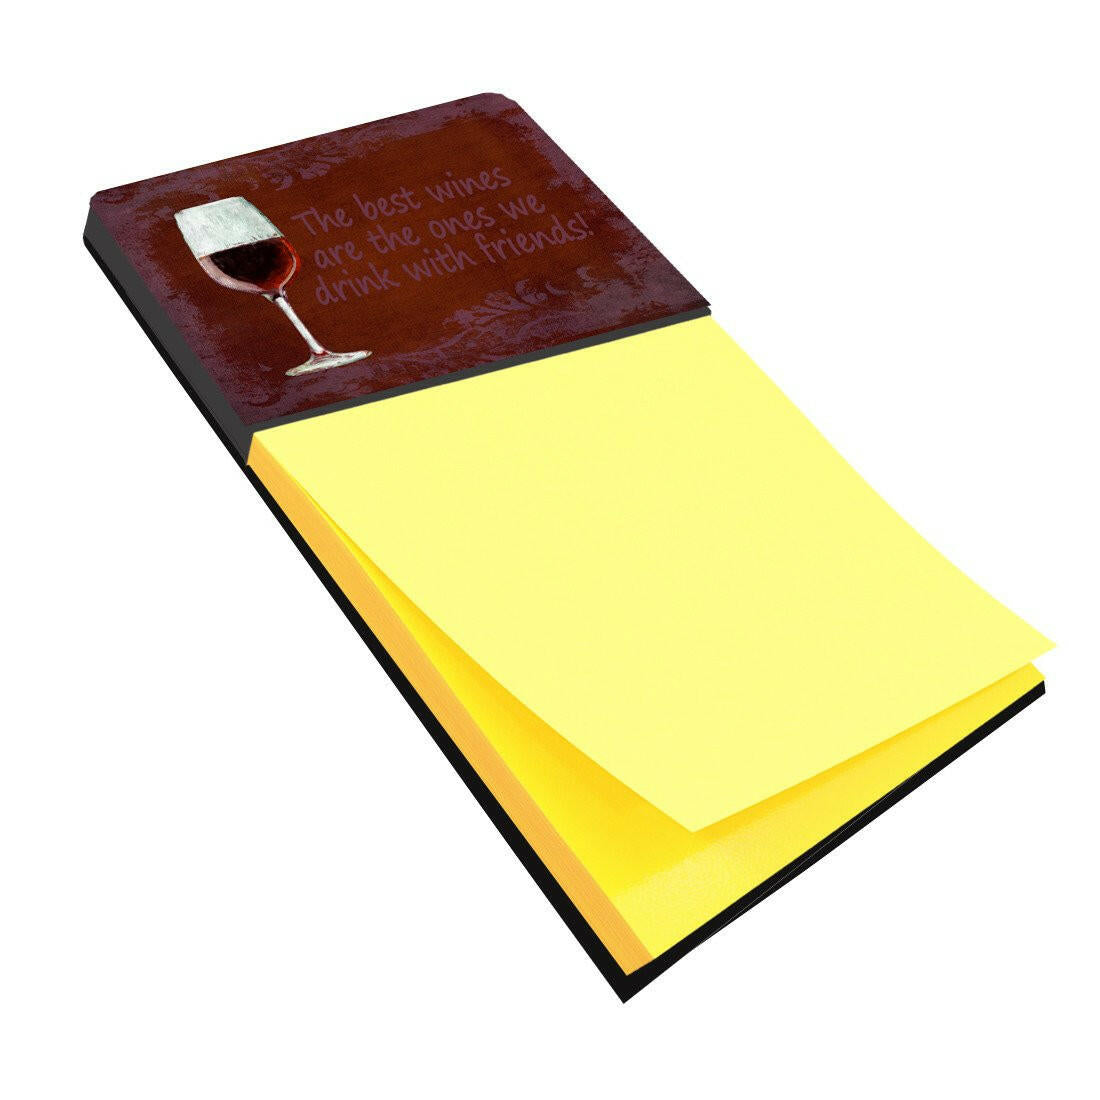 The best wines are the ones we drink with friends Refiillable Sticky Note Holder or Postit Note Dispenser SB3068SN by Caroline's Treasures